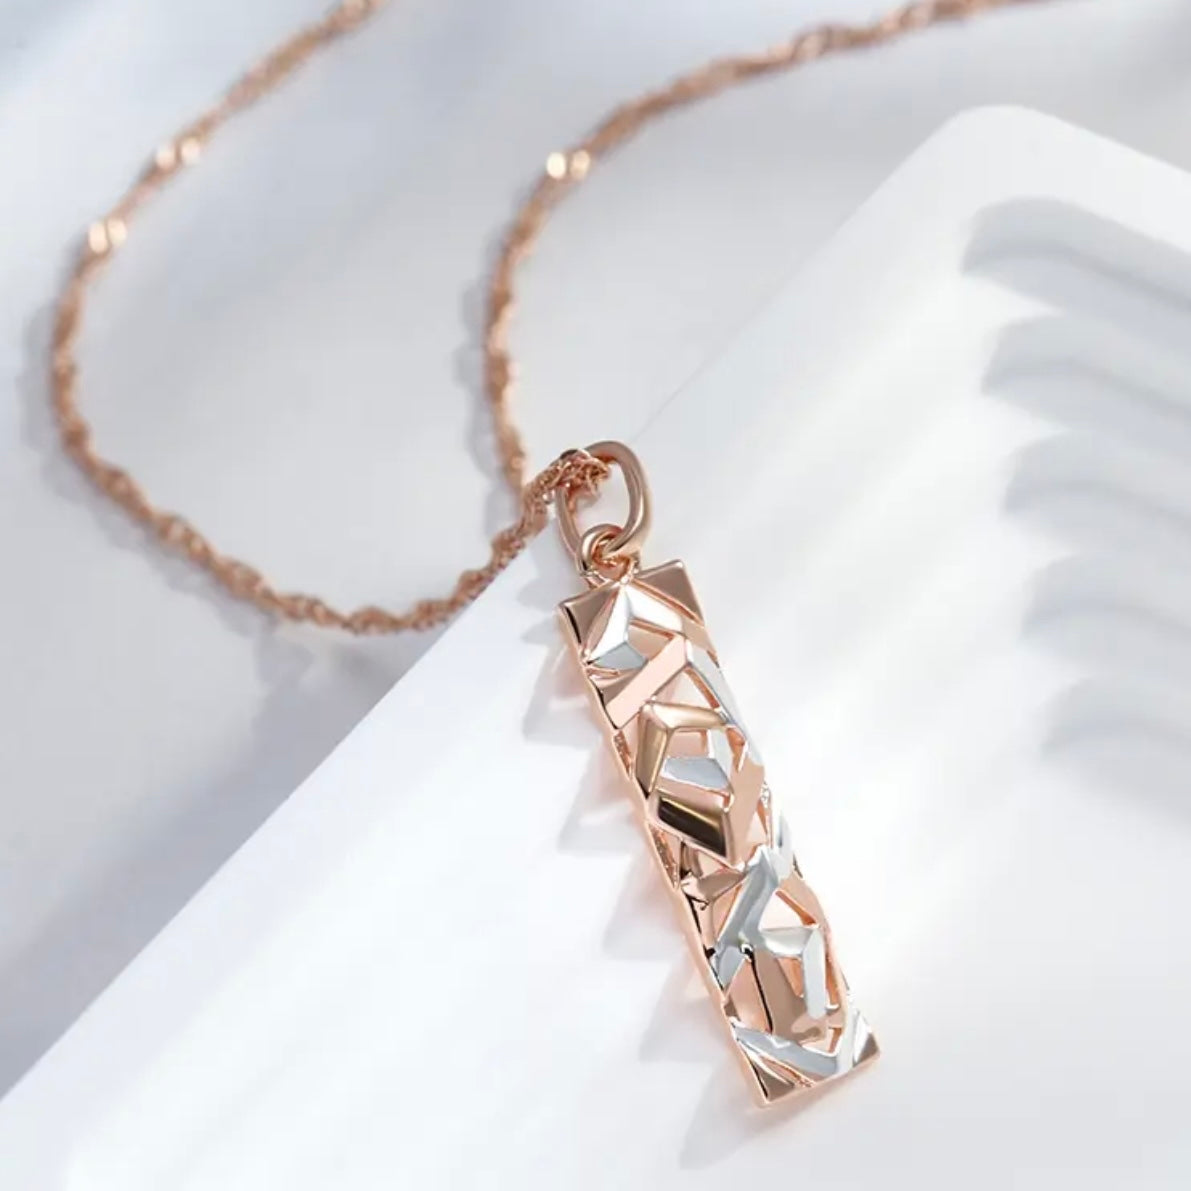 This Sterling Silver, Rose Gold, and High-grade Steel tricolor necklace and earrings set is perfect for any special woman in your life. Crafted with expertly sourced top-grade steel and silver material, these pieces are timeless and sure to make a lasting impression. The pendant is a twisted-rectangle shape adorned with dazzling sparkles, while the 18-inch link-style necklace complements with a bold yet elegant look. Matching tricolor earrings complete the set - perfect for any occasion! 